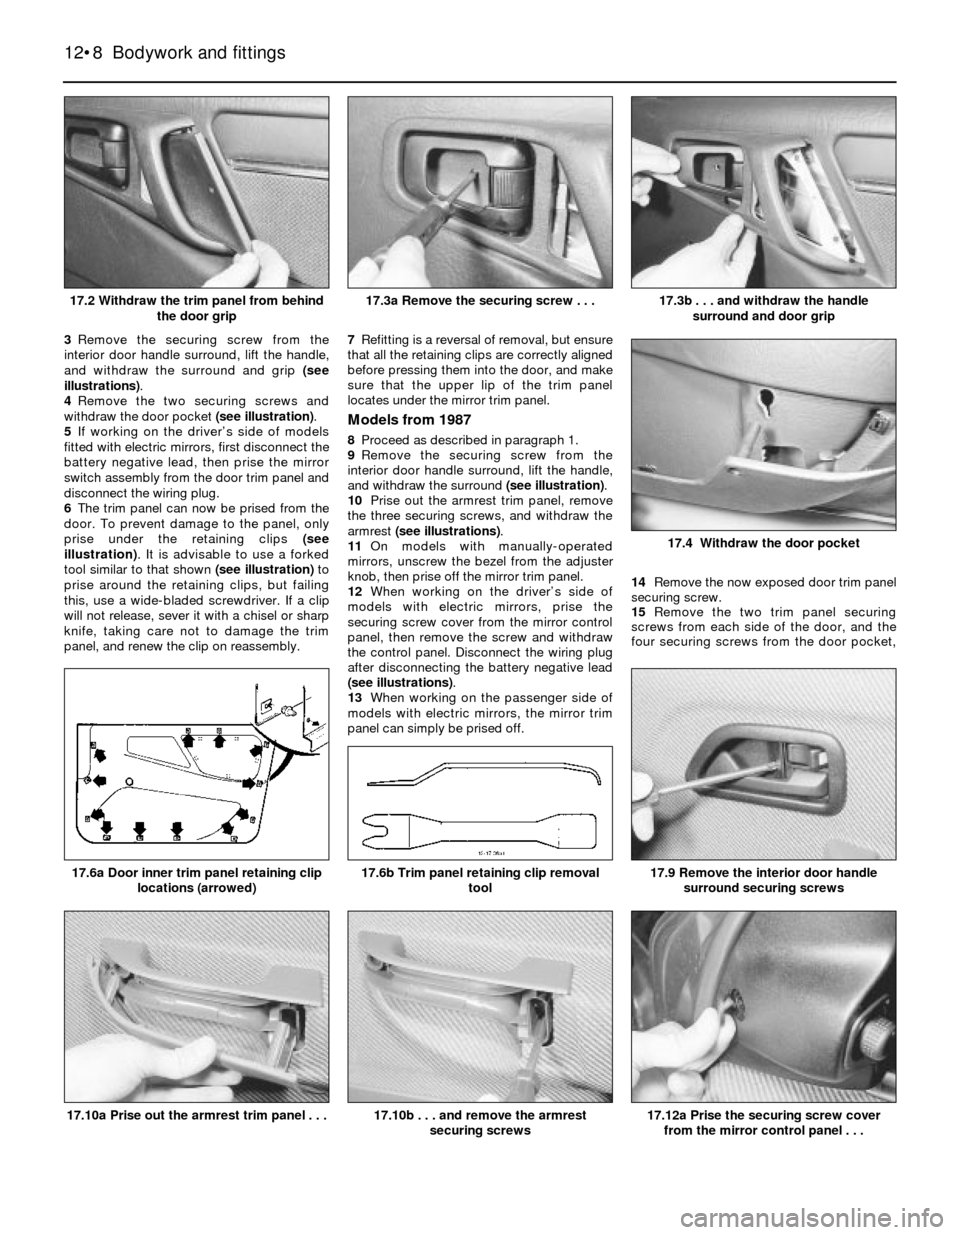 FORD SIERRA 1993 2.G Bodywork And Fittings Workshop Manual 3Remove the securing screw from the
interior door handle surround, lift the handle,
and withdraw the surround and grip (see
illustrations).
4Remove the two securing screws and
withdraw the door pocket